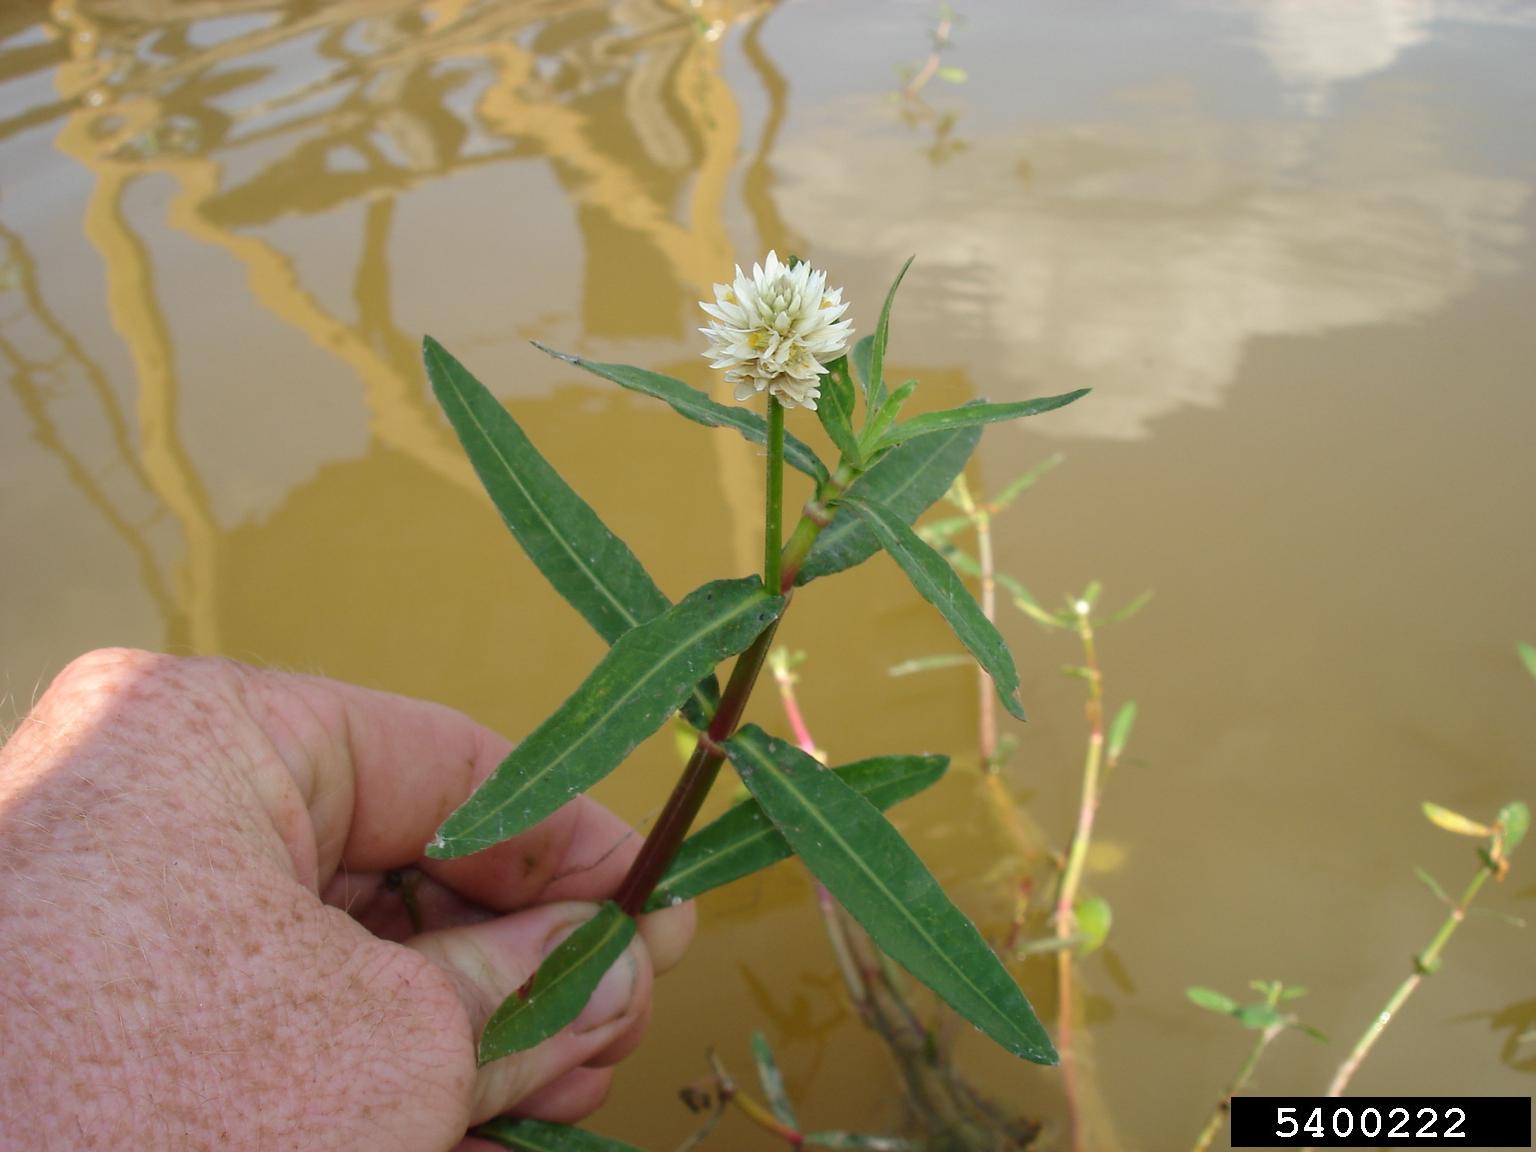 Flowering plant showing typical aquatic growing conditions.